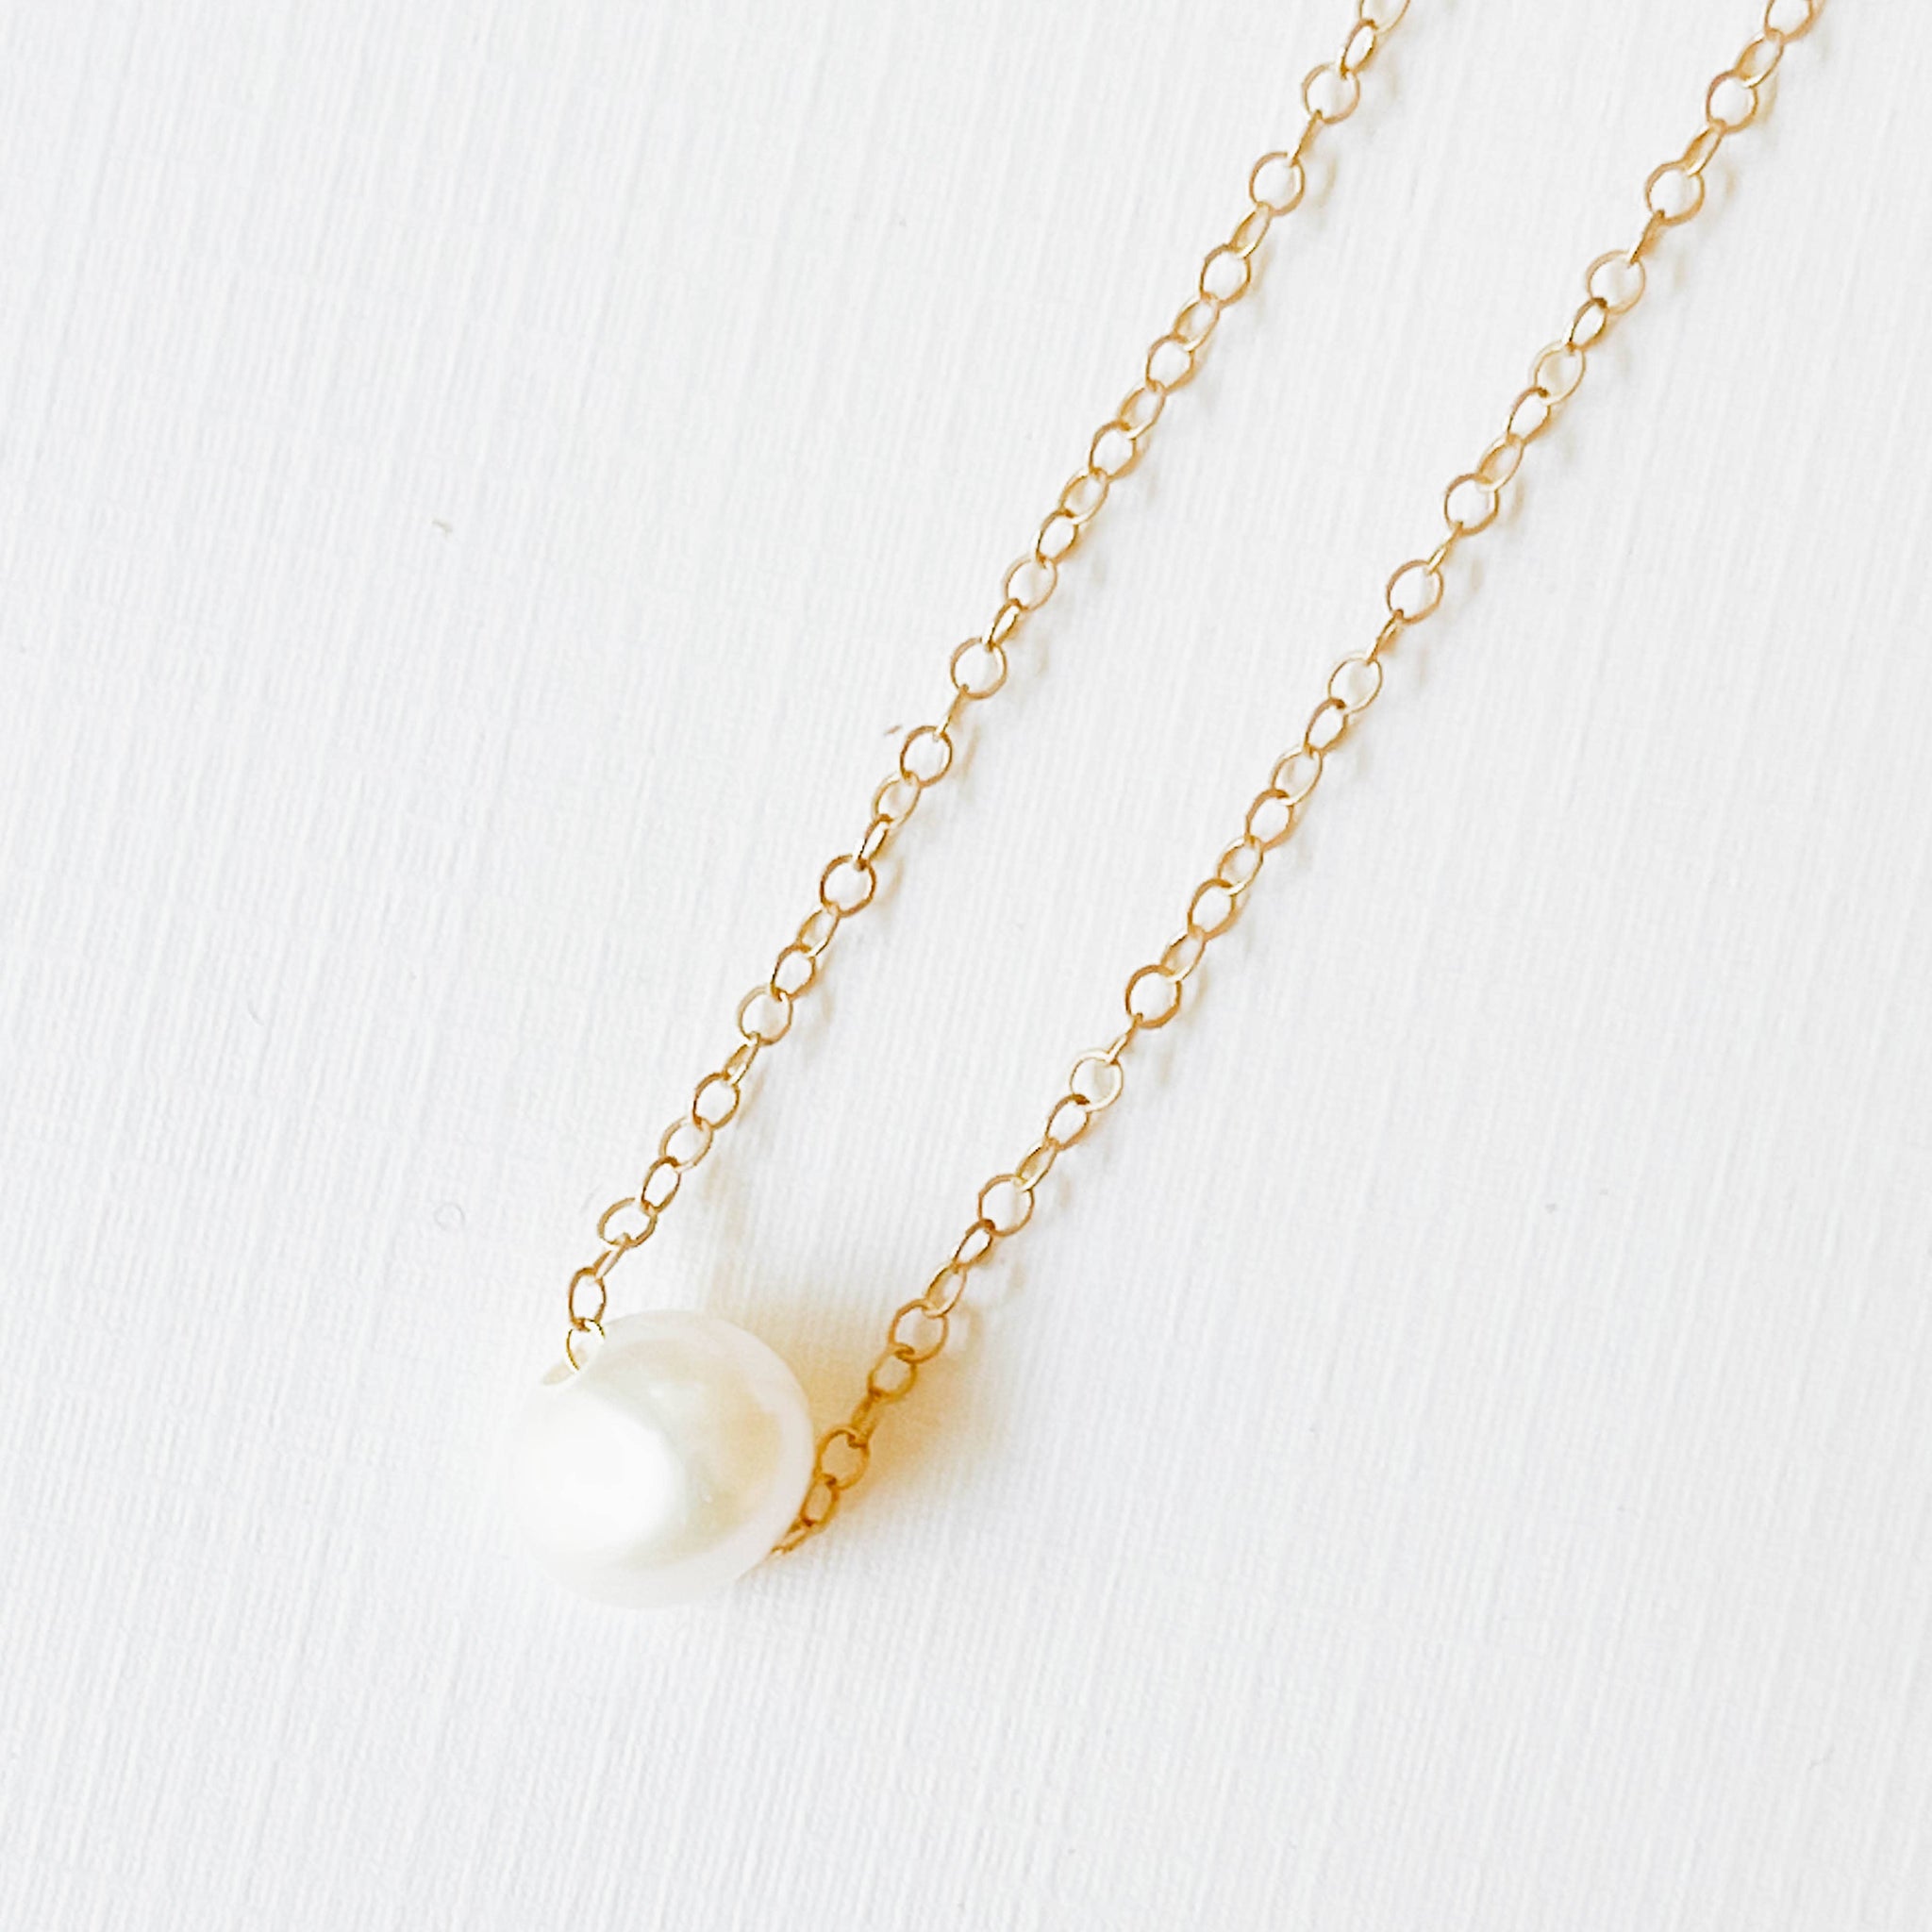 Floating pearl necklace